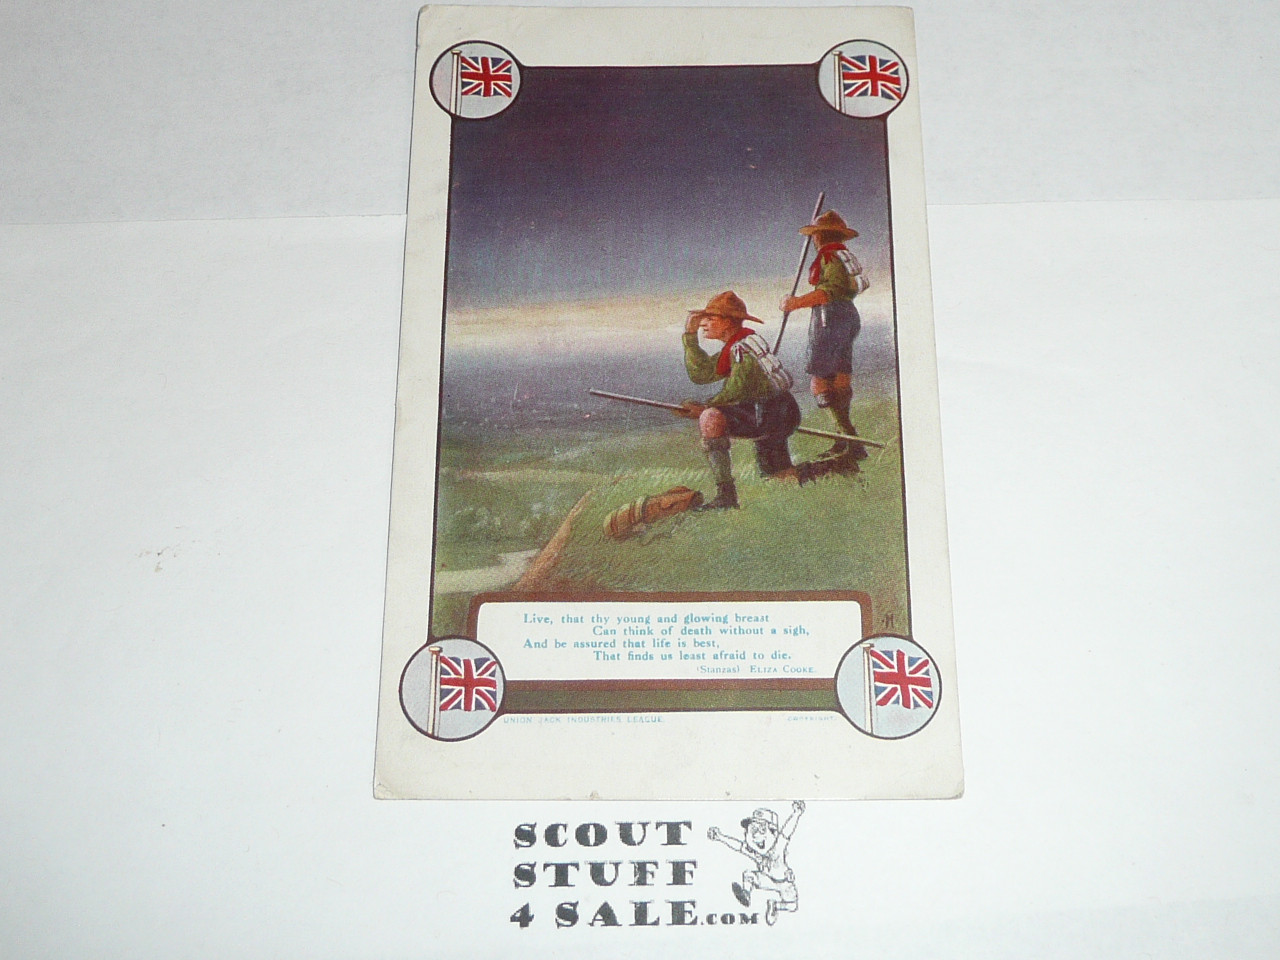 Teen's British Boy Scout Postcard, 2 Scouts with staphs and British Flags at corners